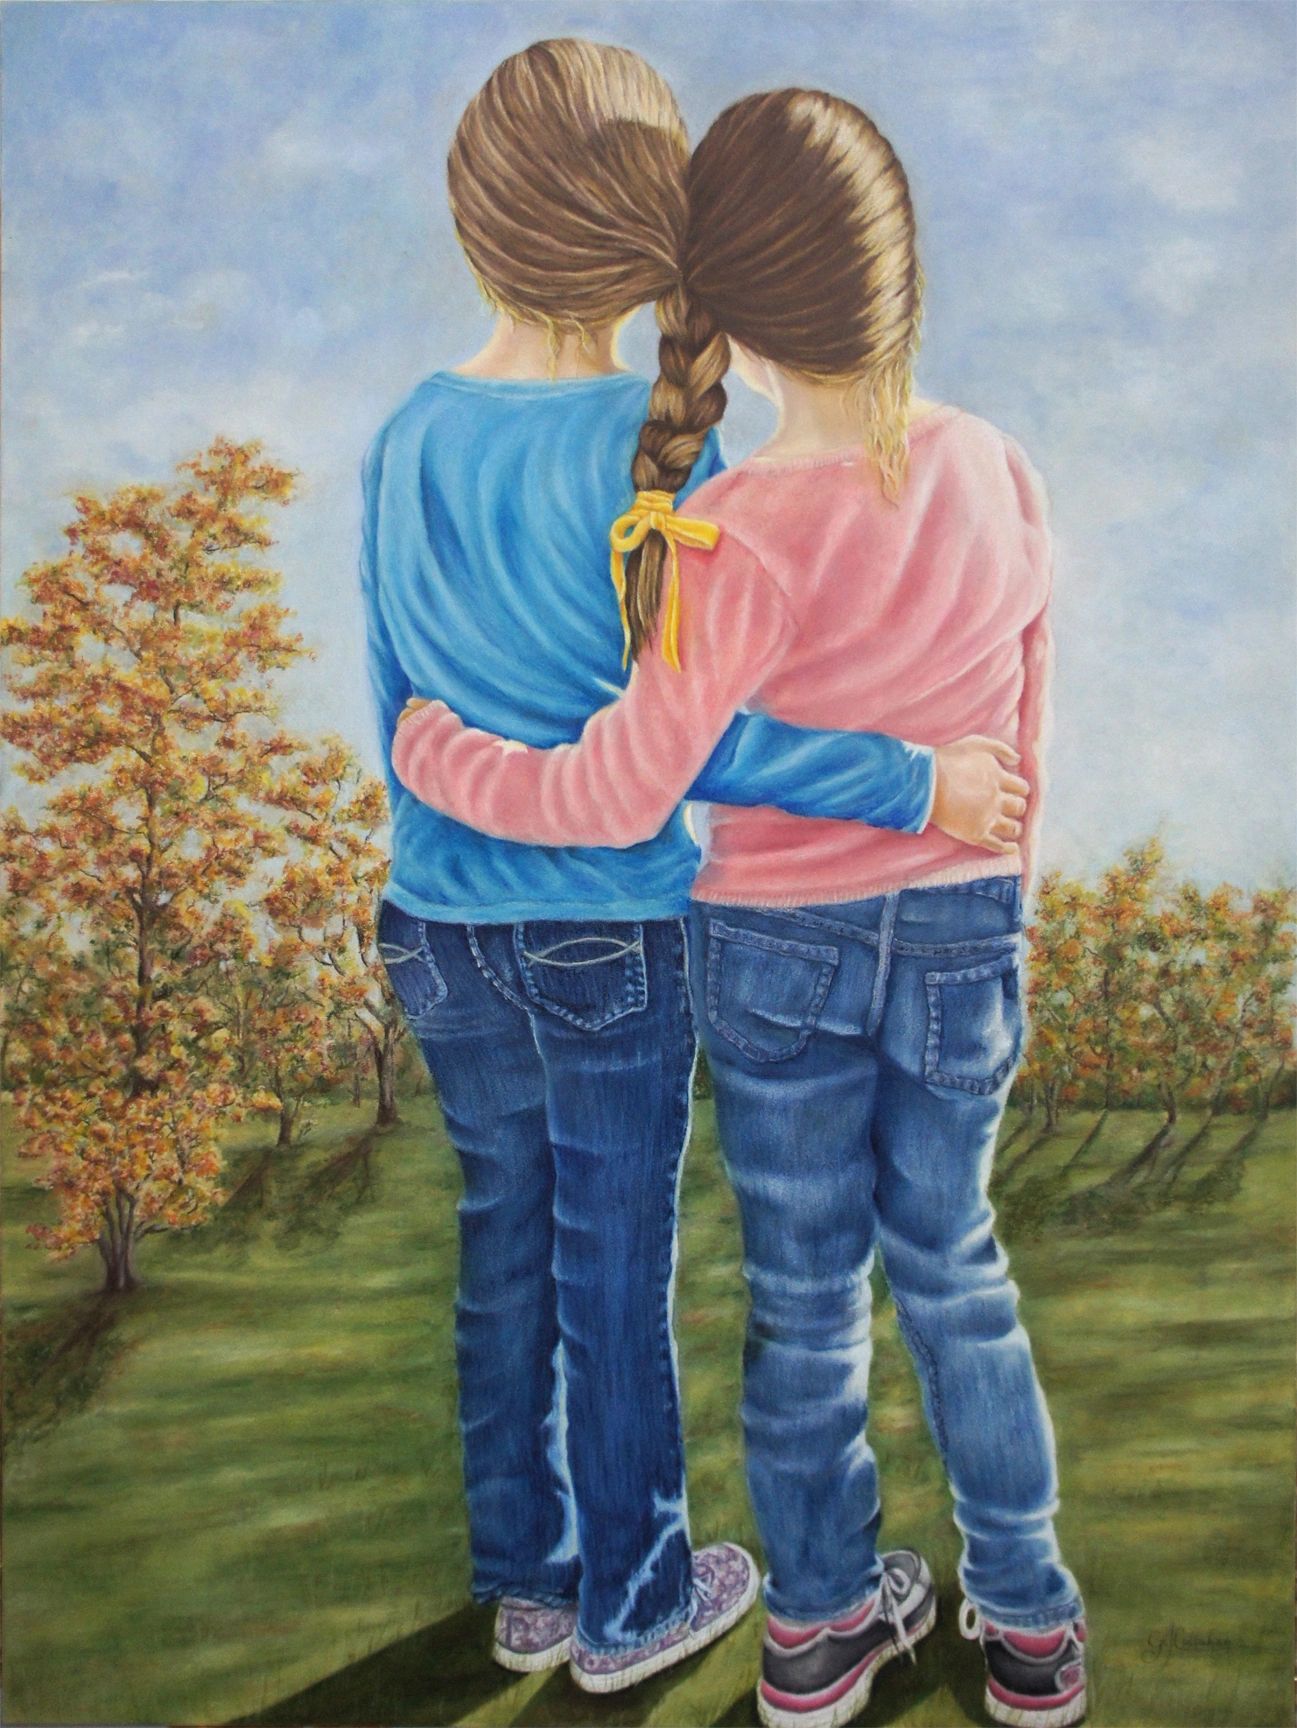 Sisterly Bond colored pencil painting